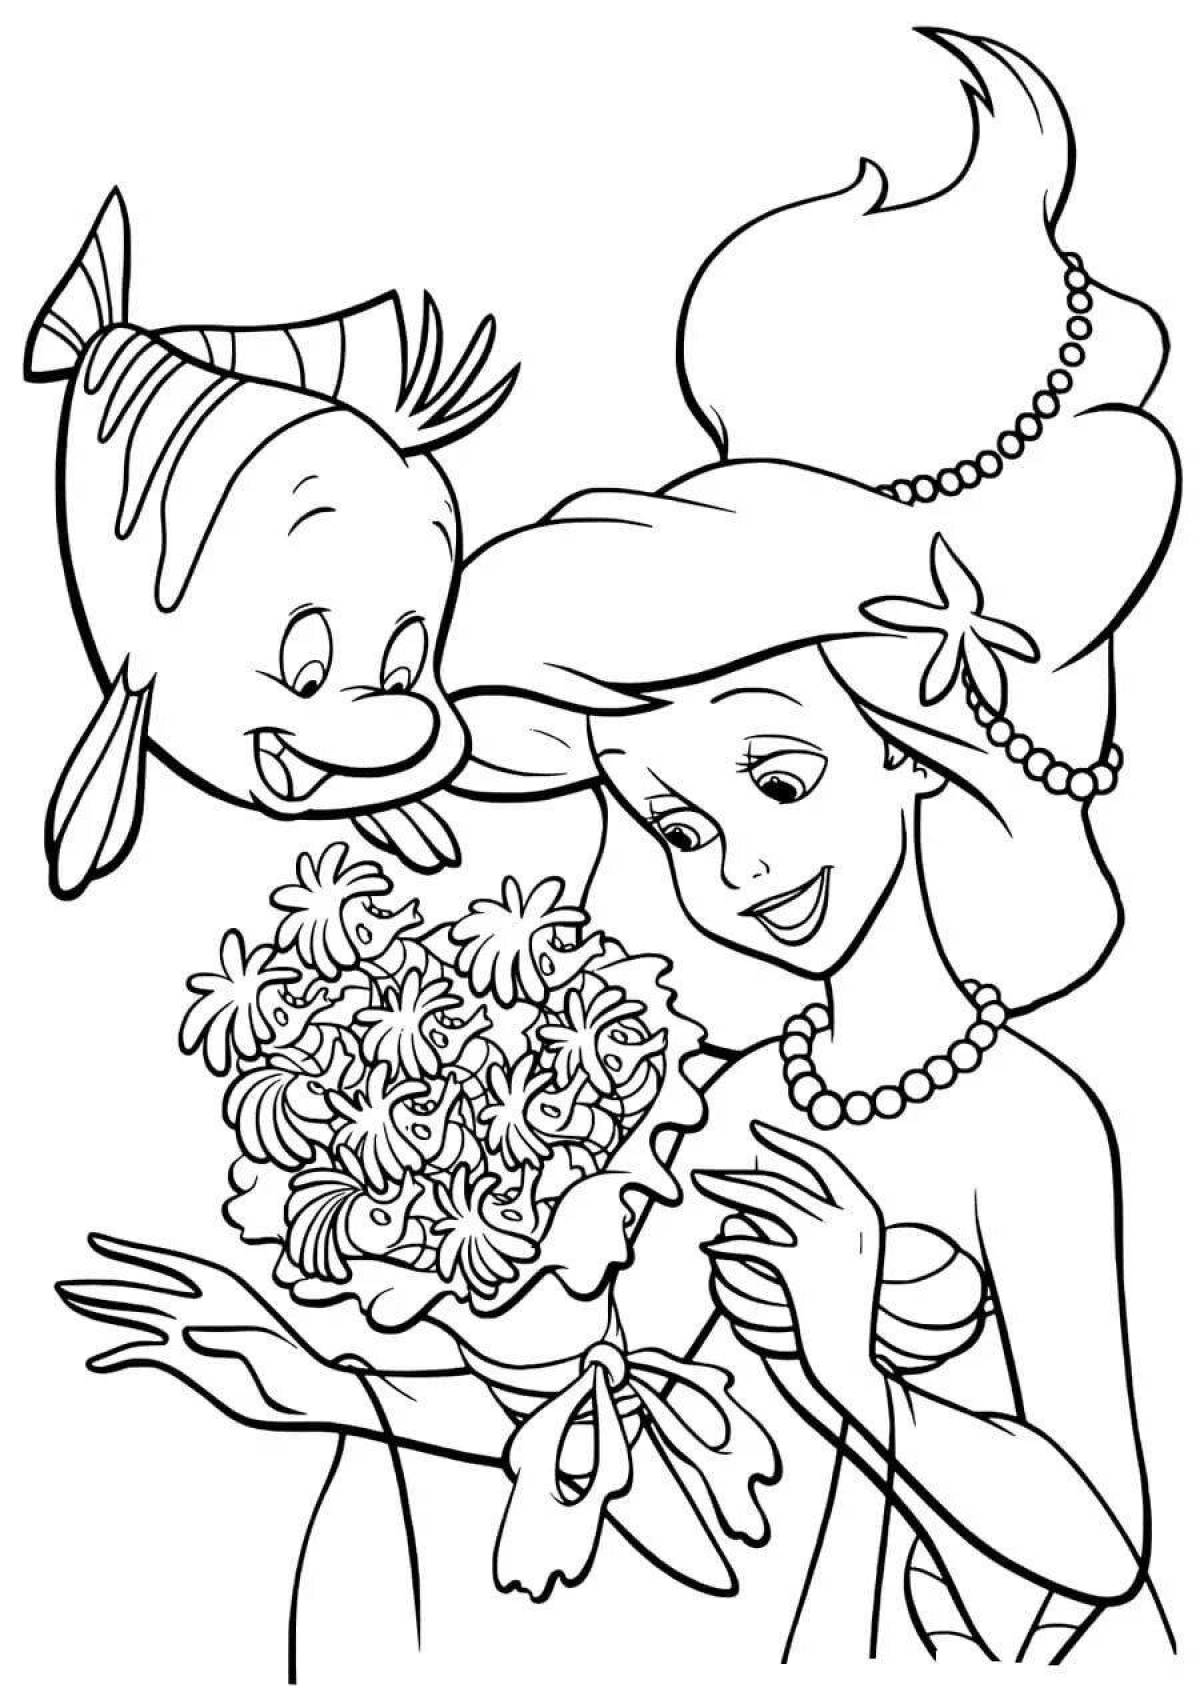 Ariel coloring book for girls